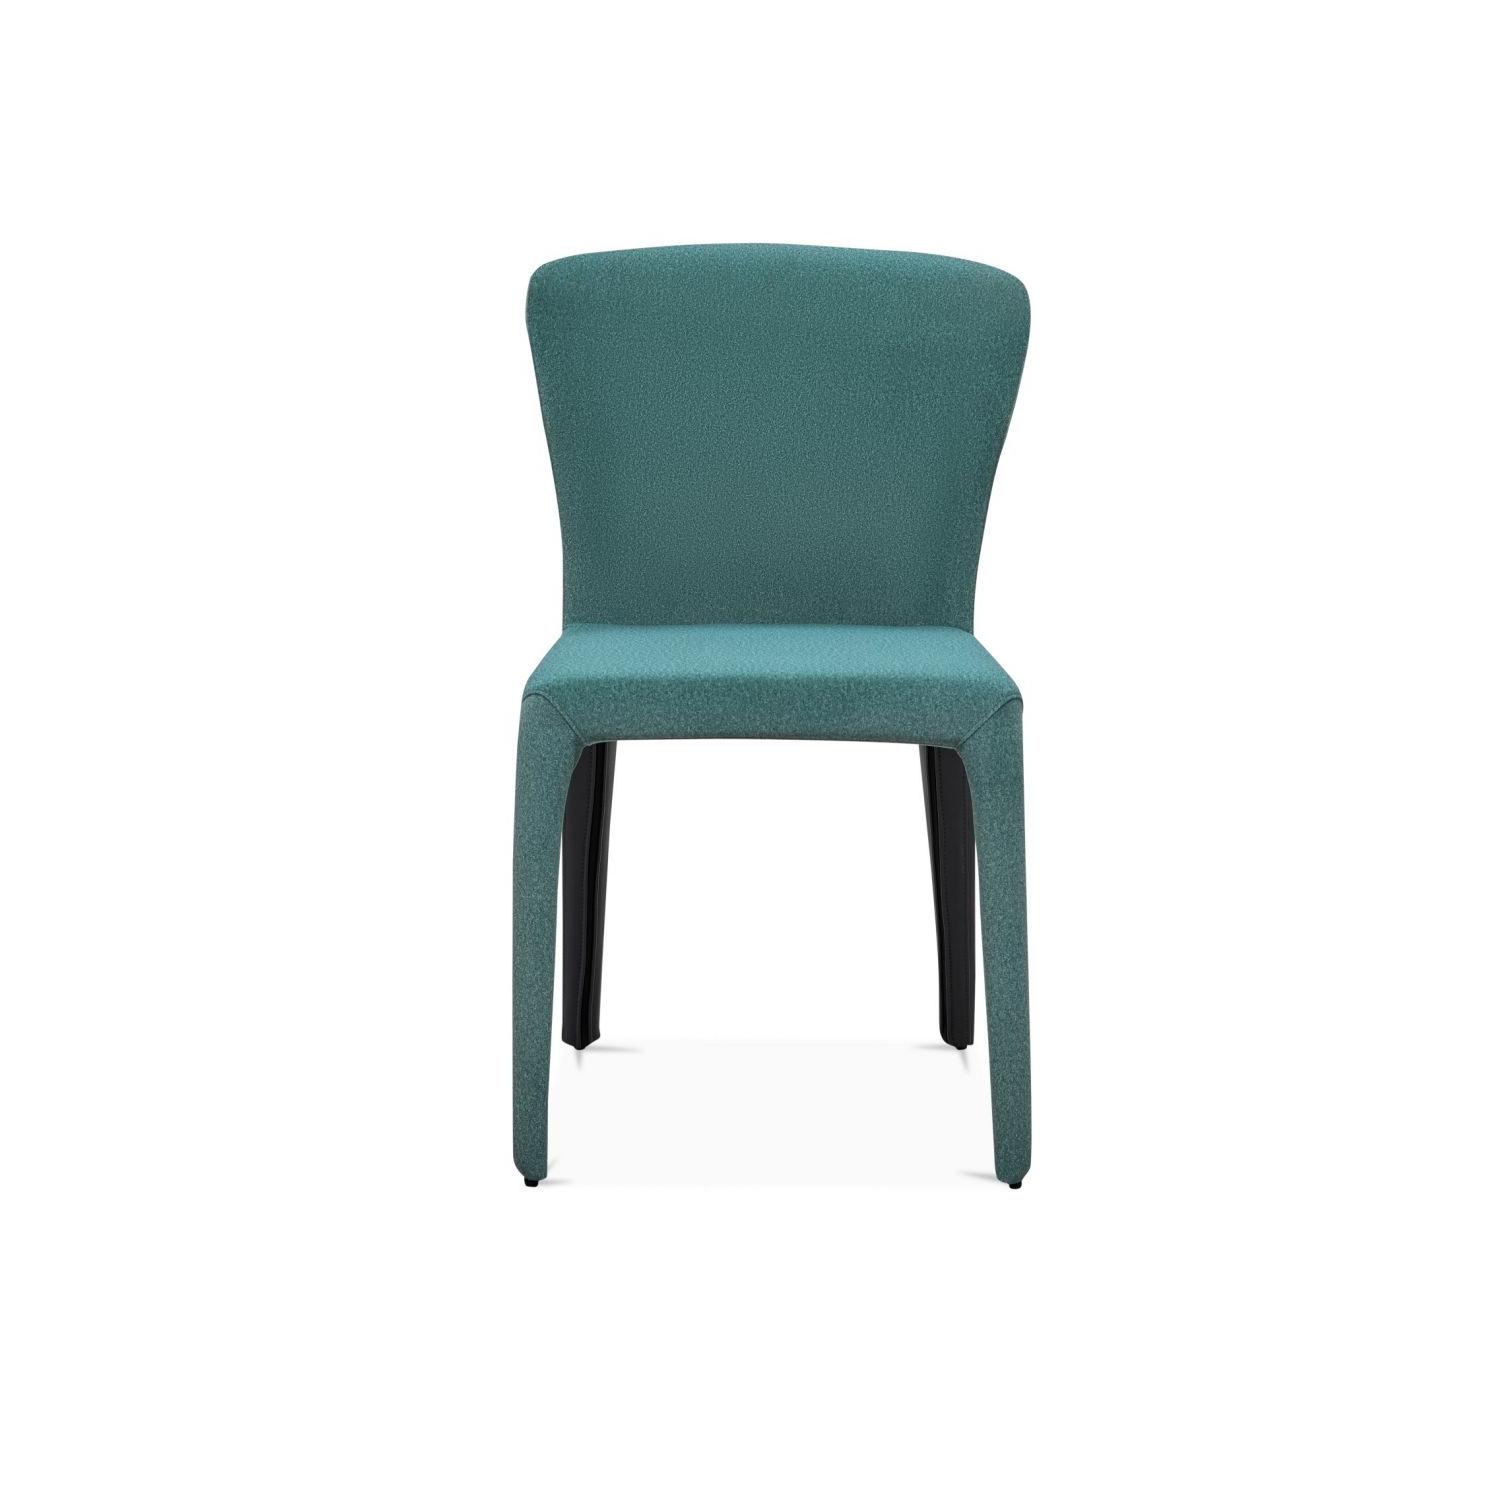 Modern Green Dining Room Chair For Living Room